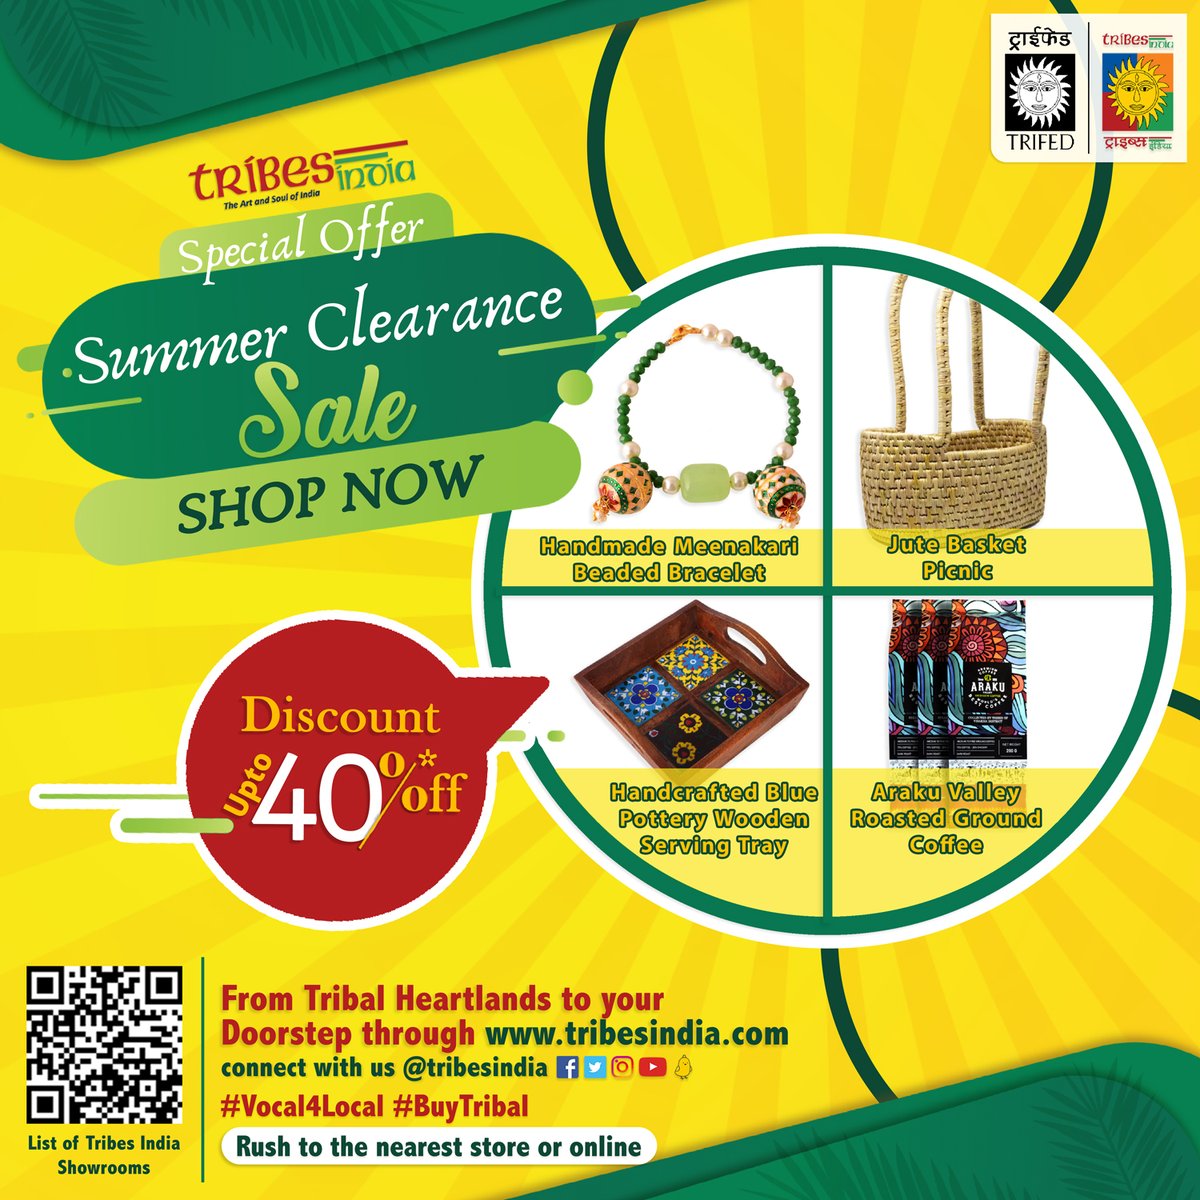 Get ready for a summer of savings! Enjoy #discounts of up to 40% on #tribalhandloom & #handicraft products, and up to 10% off on organic food products.

Don't miss out on these great deals!: tribesindia.com

#ClearanceSale #SummerSavings #Vocal4Local #BuyTribal